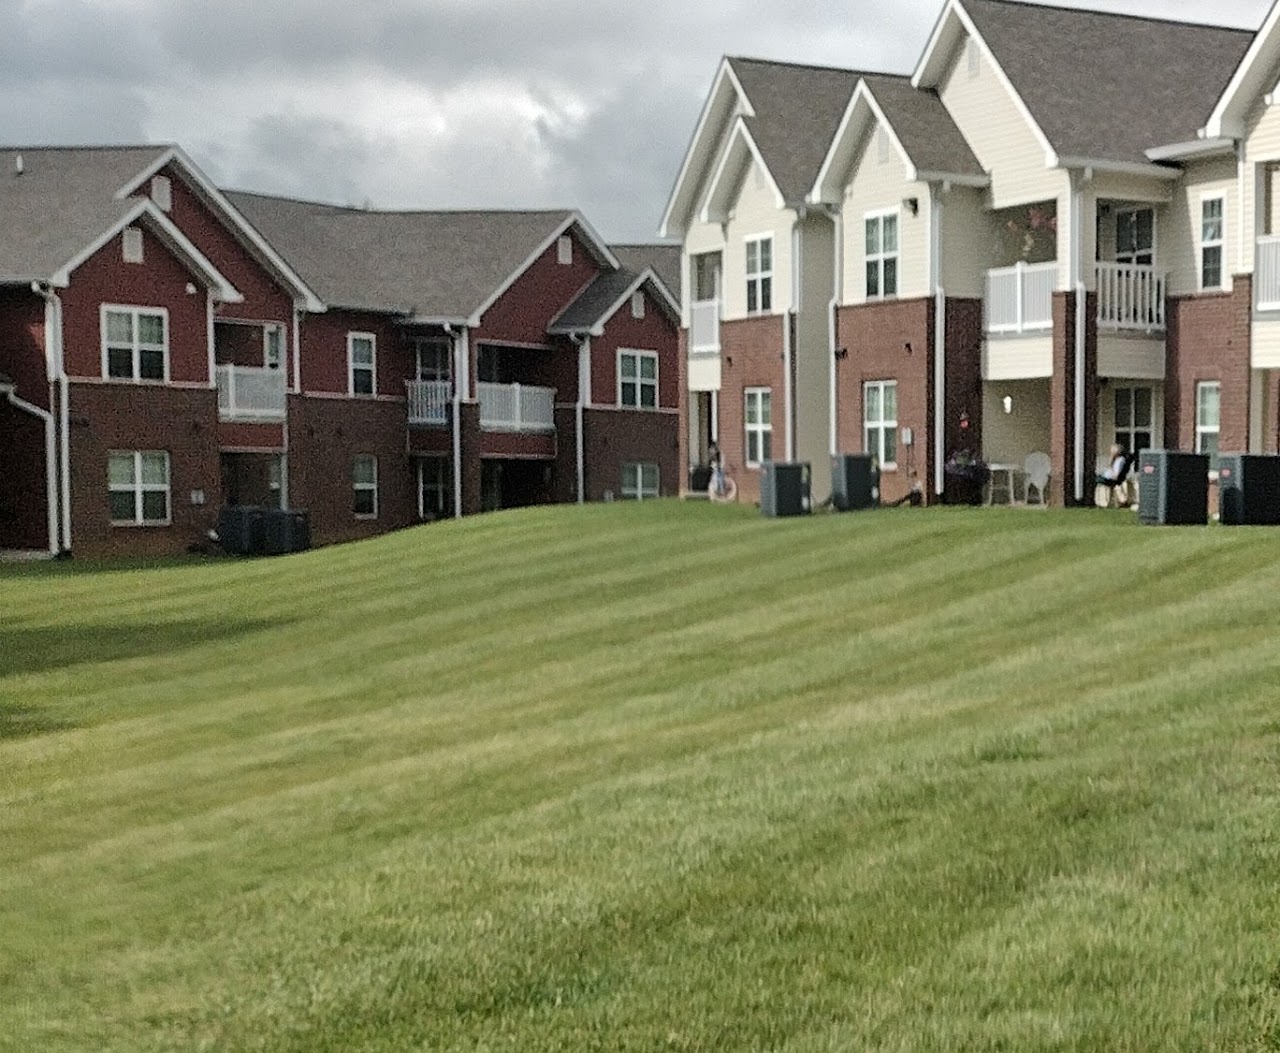 Photo of FOOTHILLS VILLAGE. Affordable housing located at 527 FOOTHILLS VILLAGE CIR MARYVILLE, TN 37801